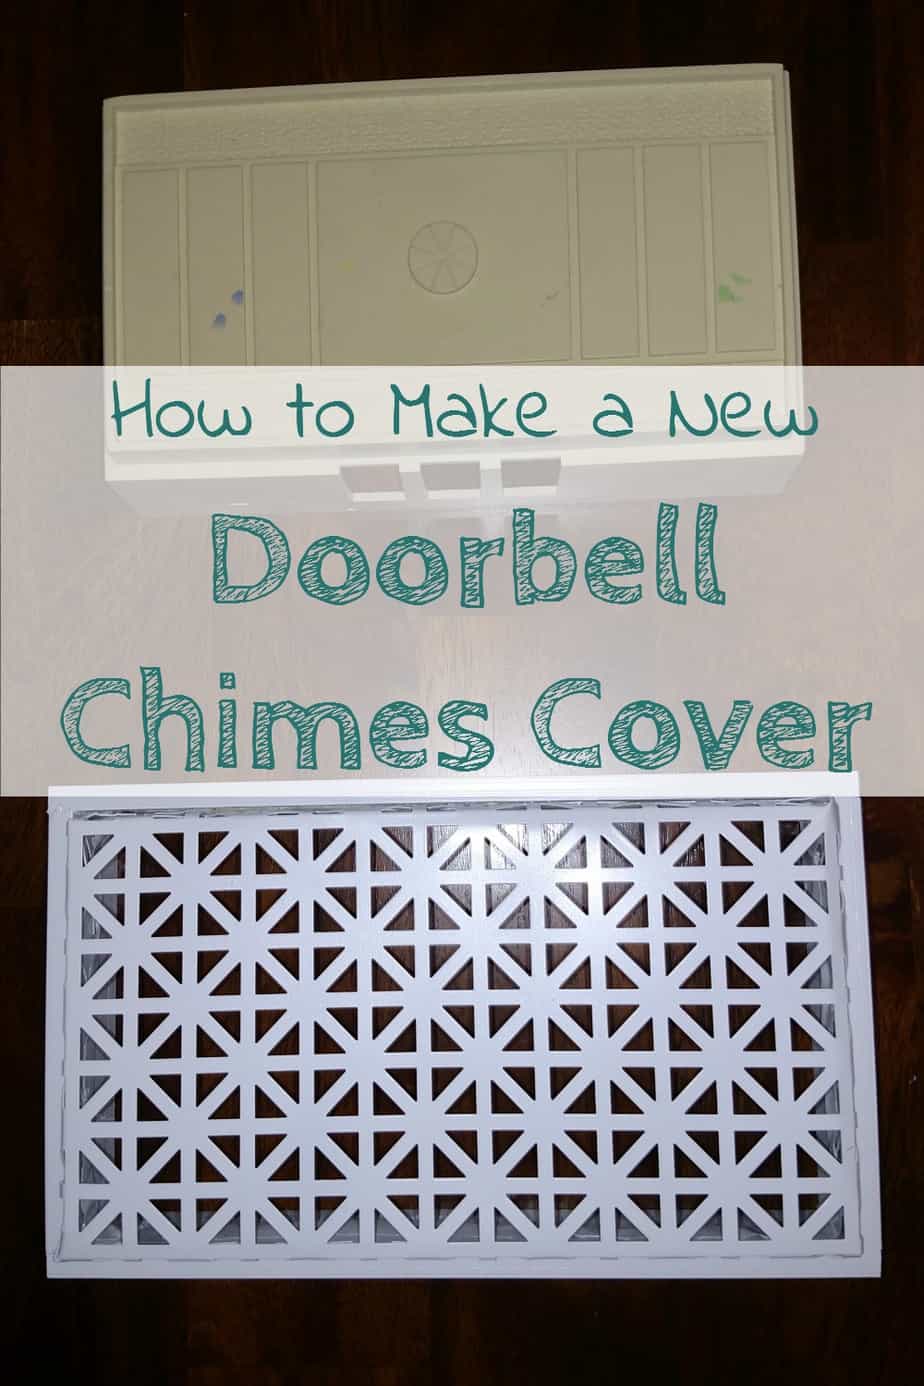 Make a new chimes cover for your old wired doorbell chimes and give it an updated look